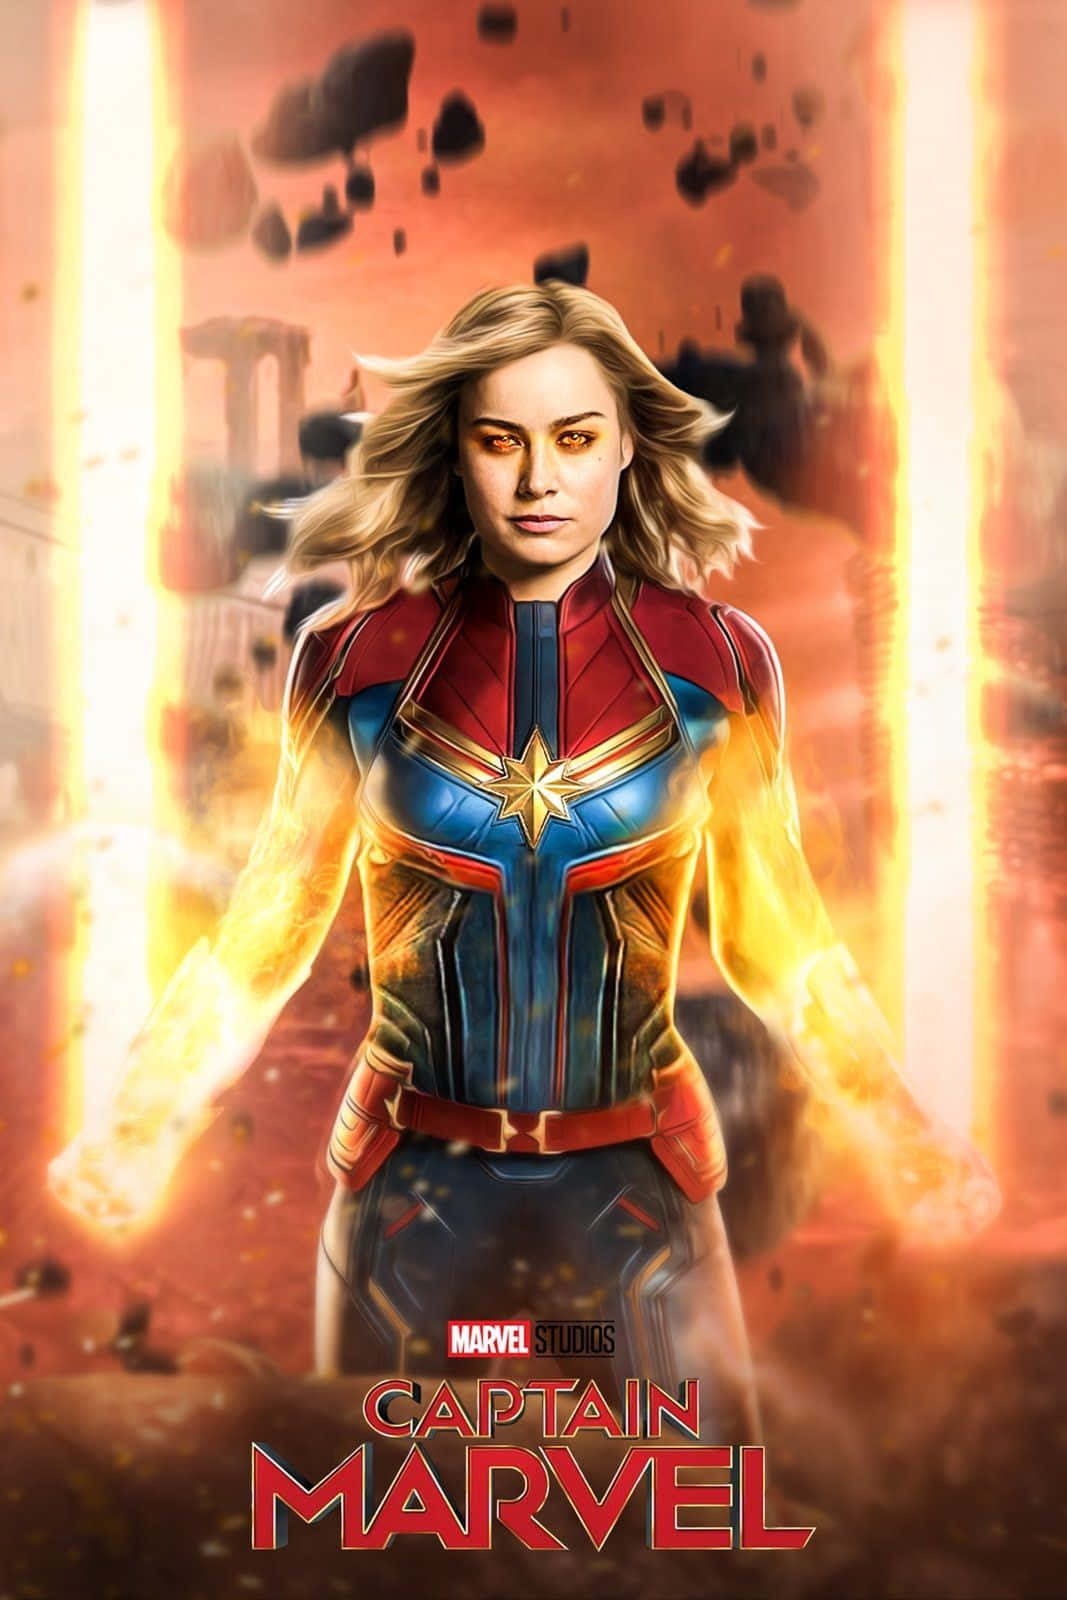 Download The superhero, Captain Marvel in all her glory | Wallpapers.com